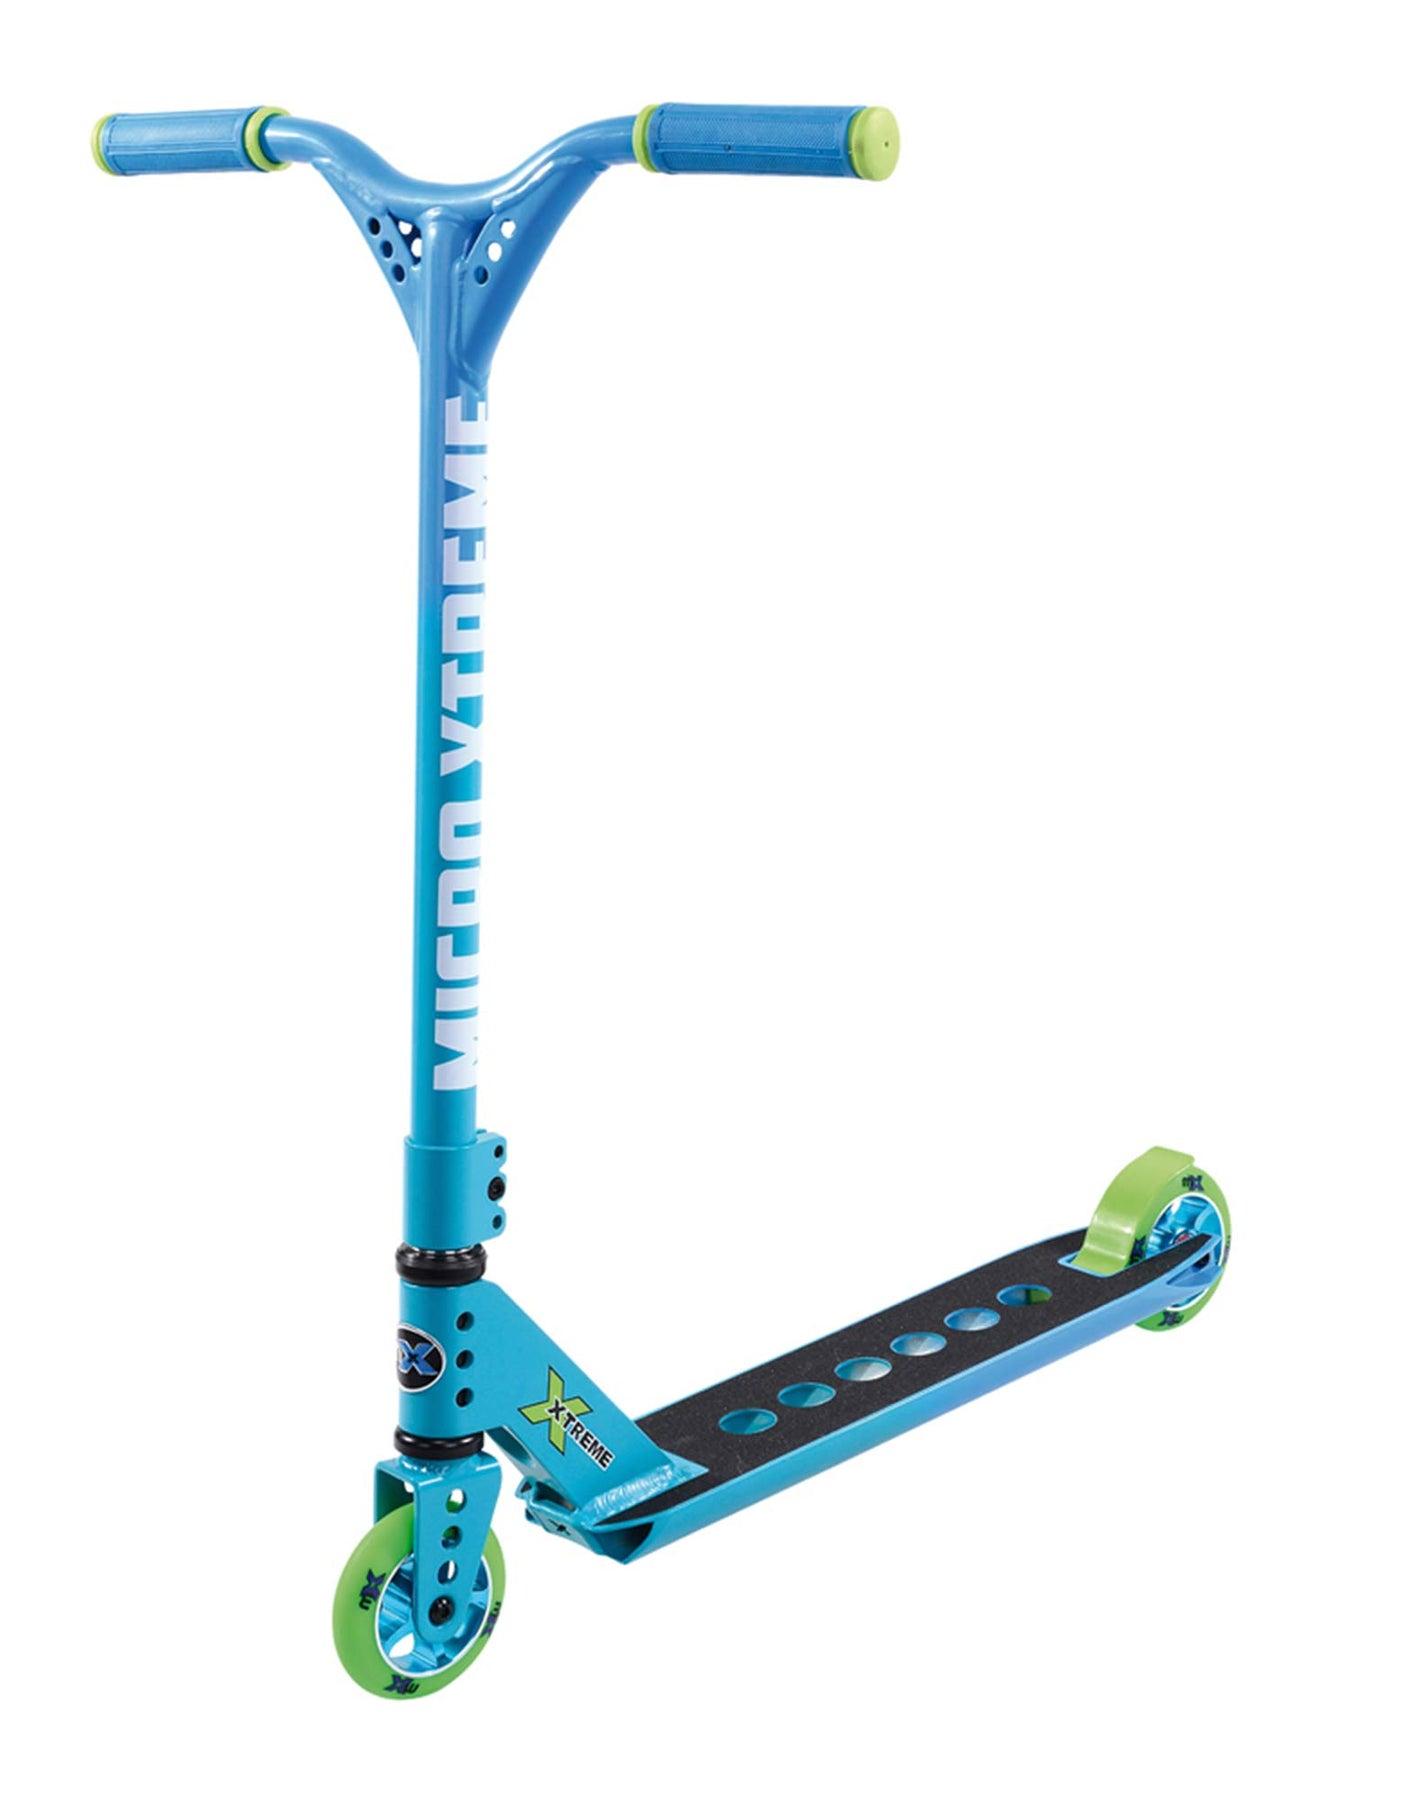 Selected image for Micro MX-TRIXX Trotinet, Rainbow Blue